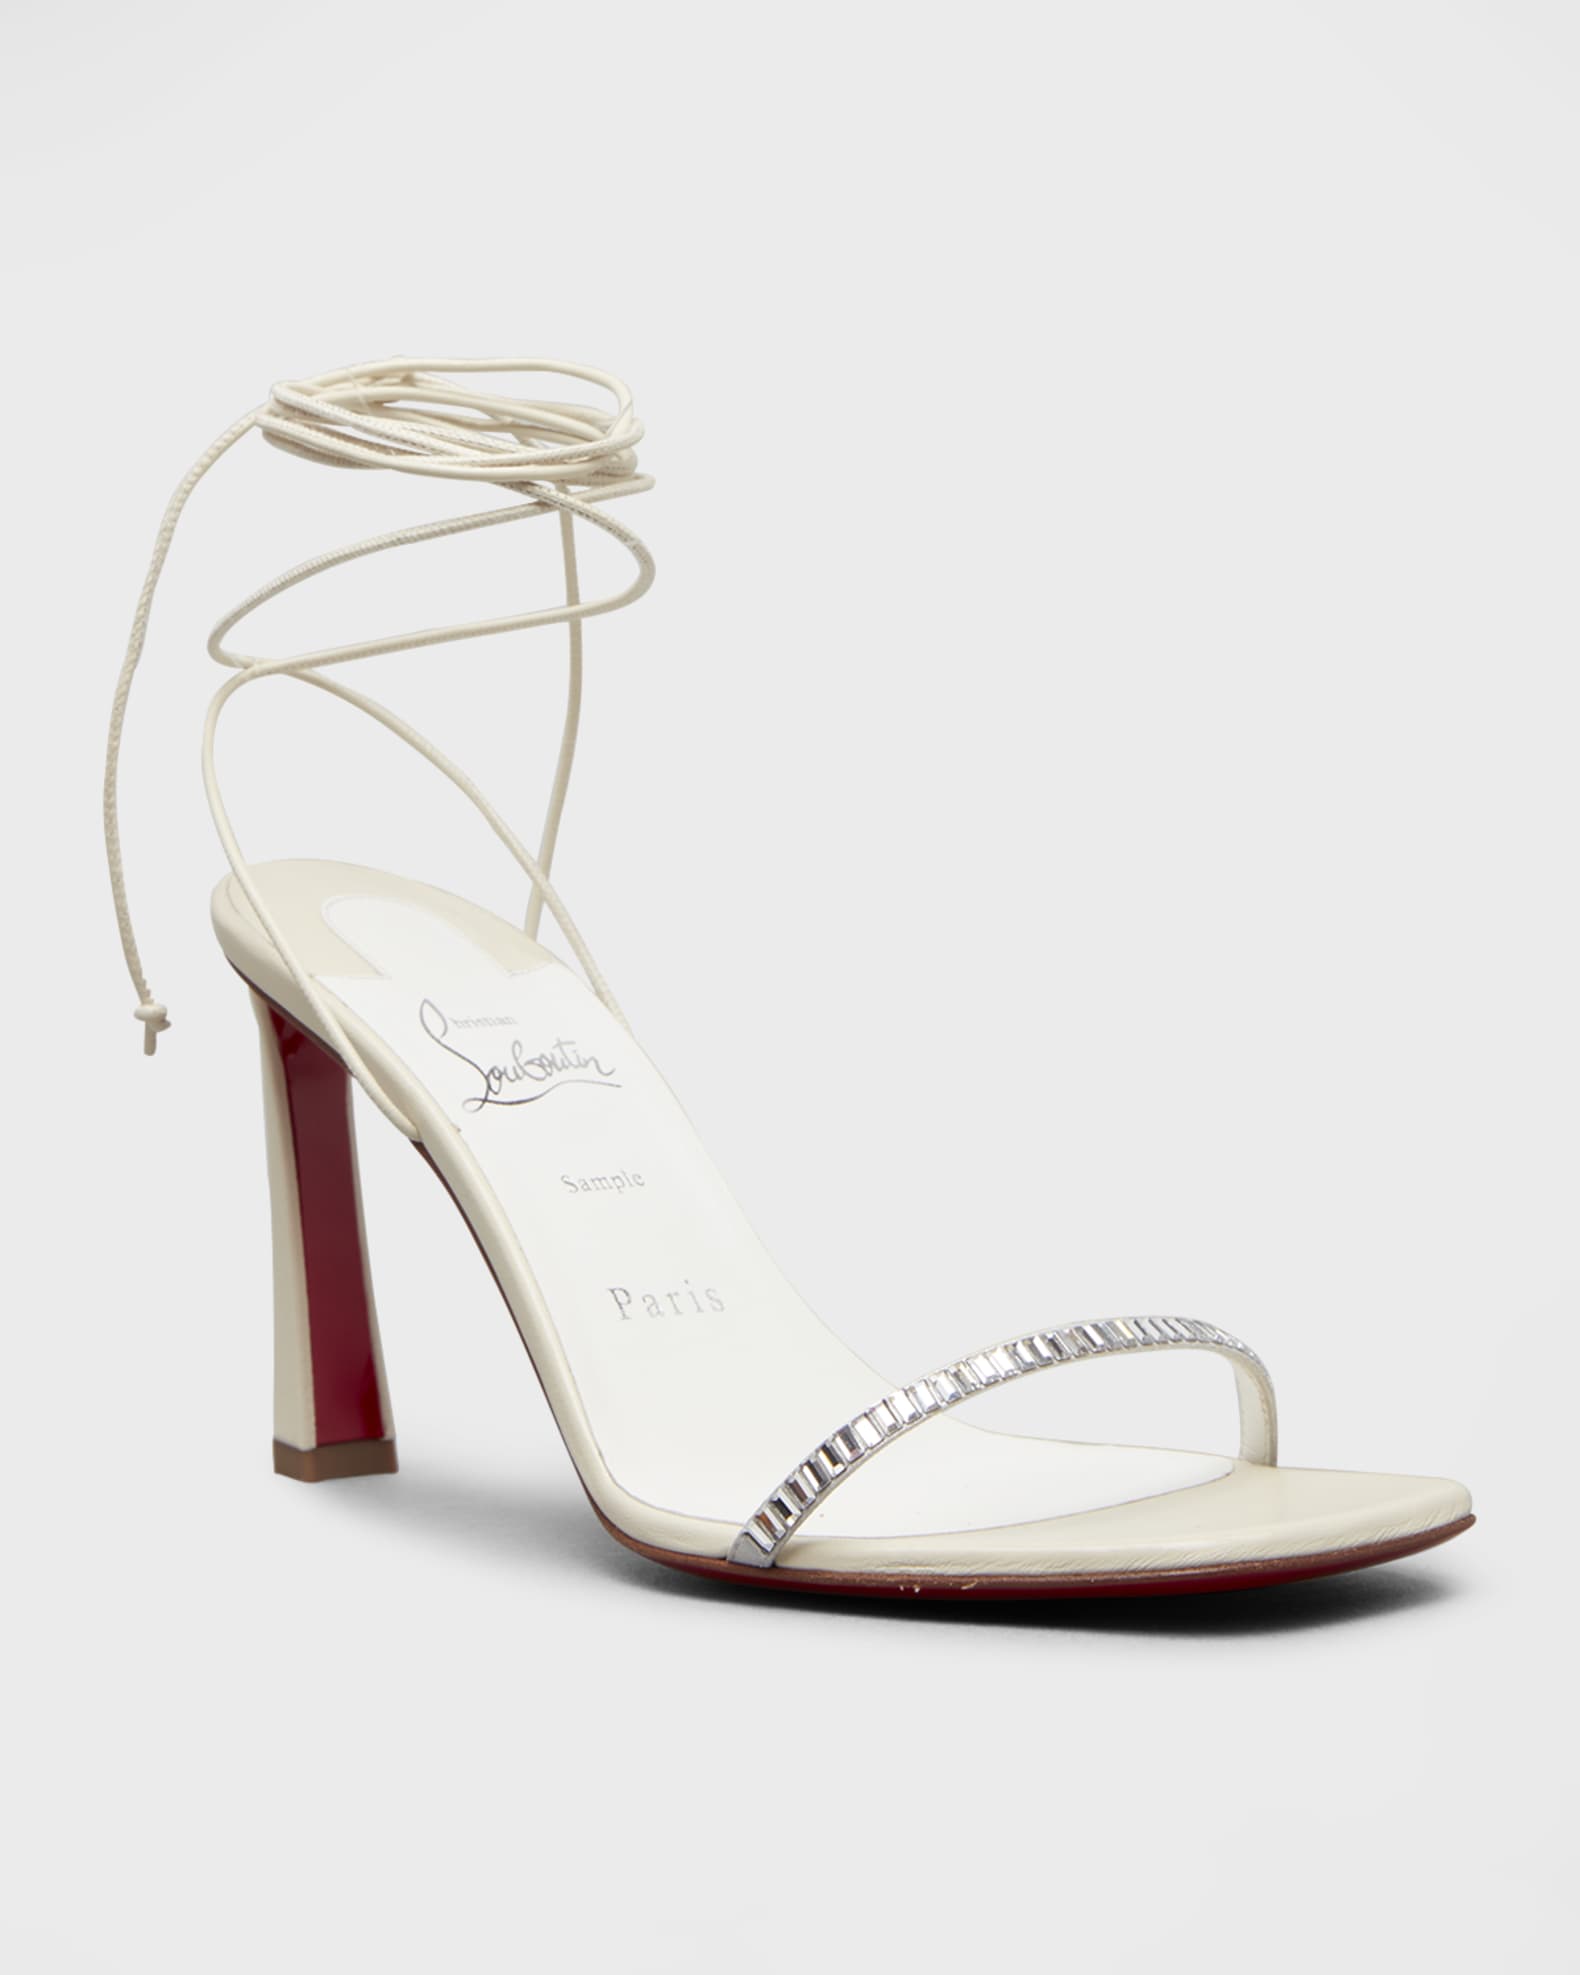 Christian Louboutin Crystal Ankle-Wrap Red Sole Sandals | Neiman Marcus